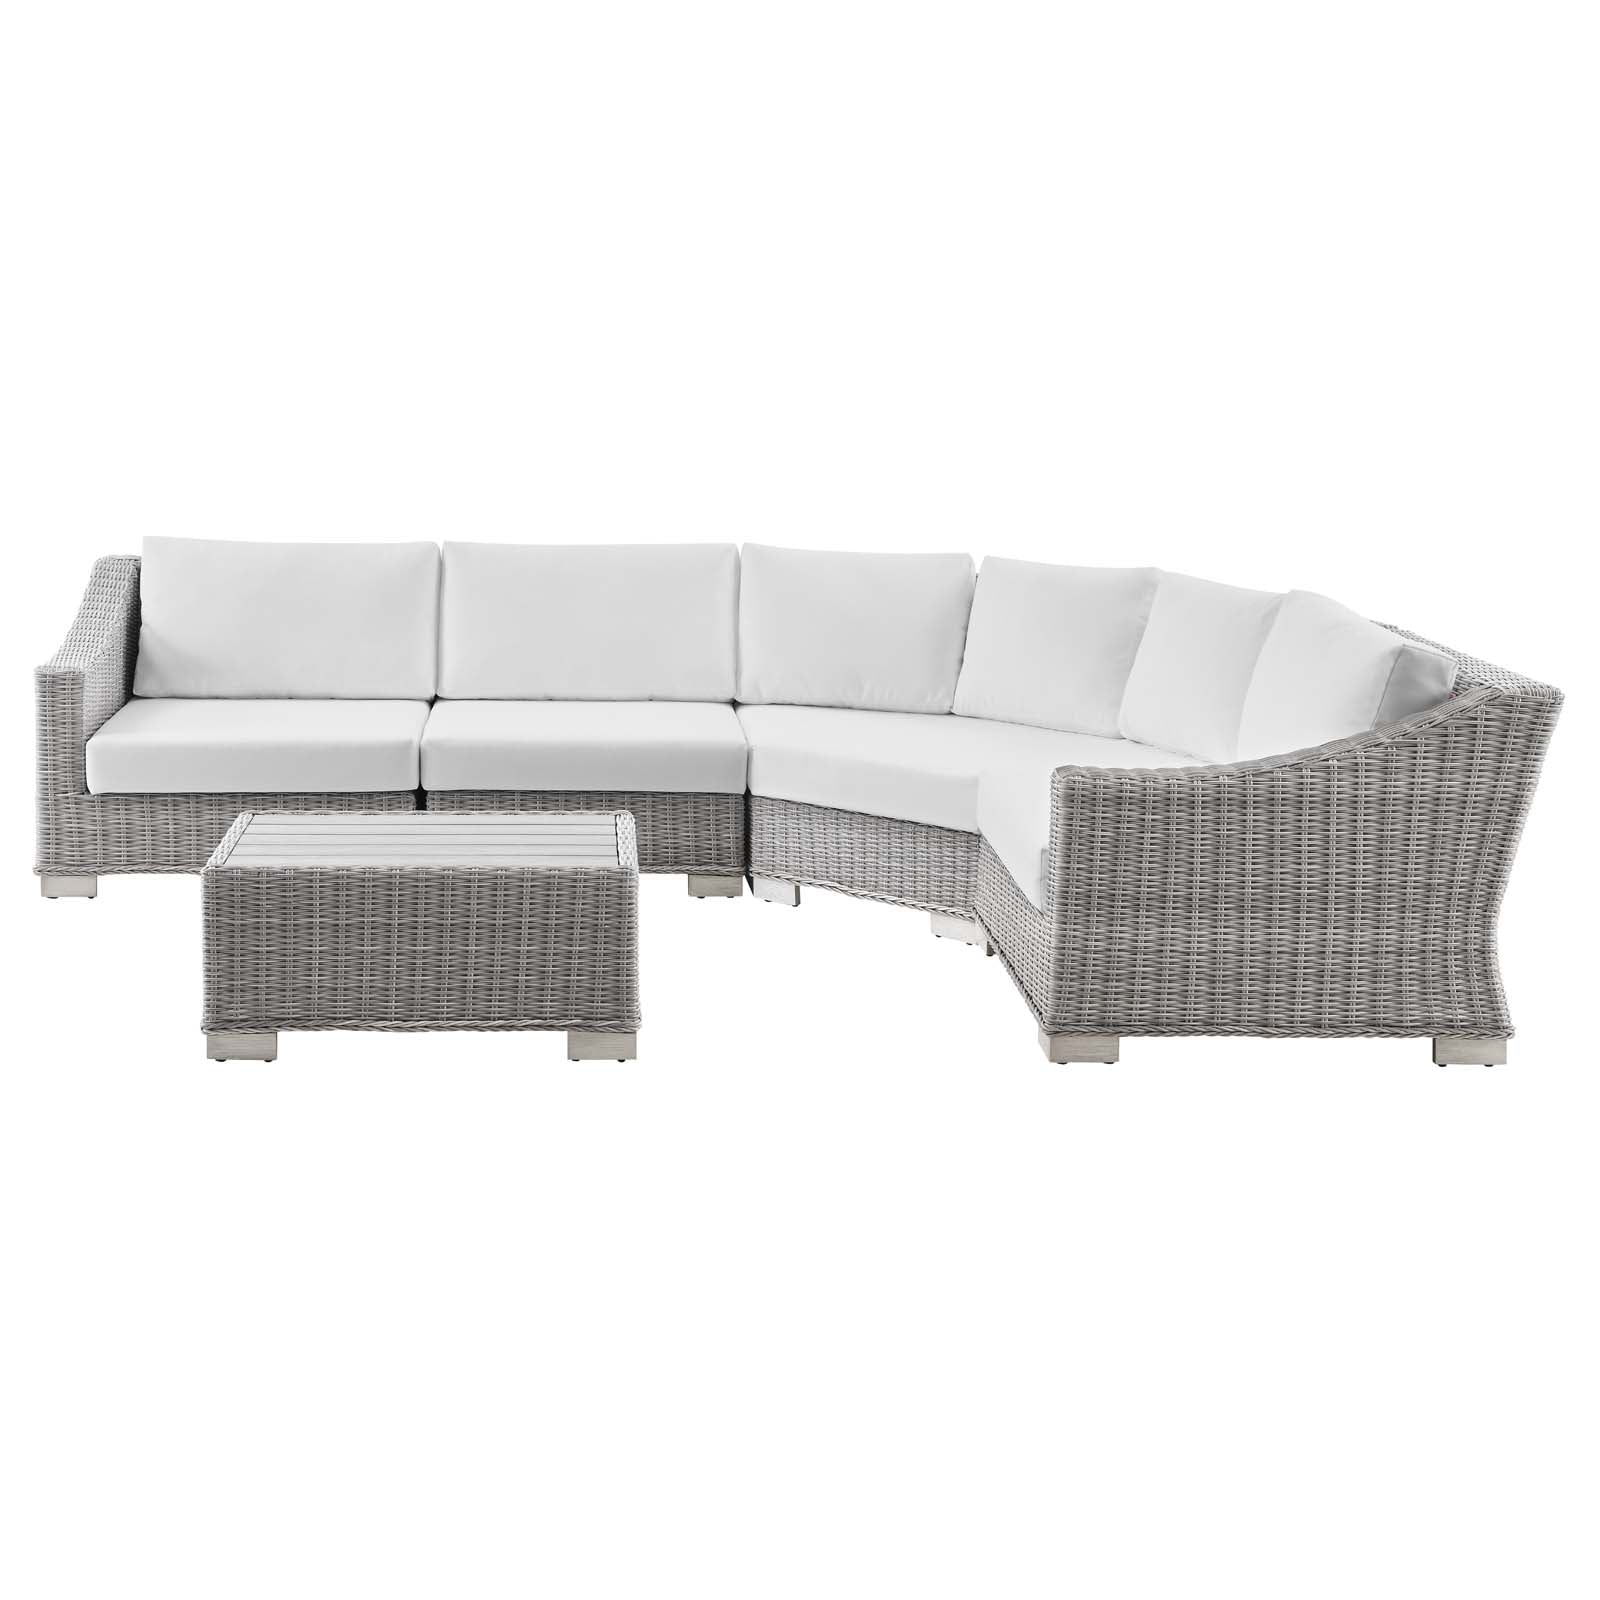 Modway Outdoor Conversation Sets - Conway Outdoor Patio Wicker Rattan 5 Piece Sectional Sofa Furniture Set Light Gray White